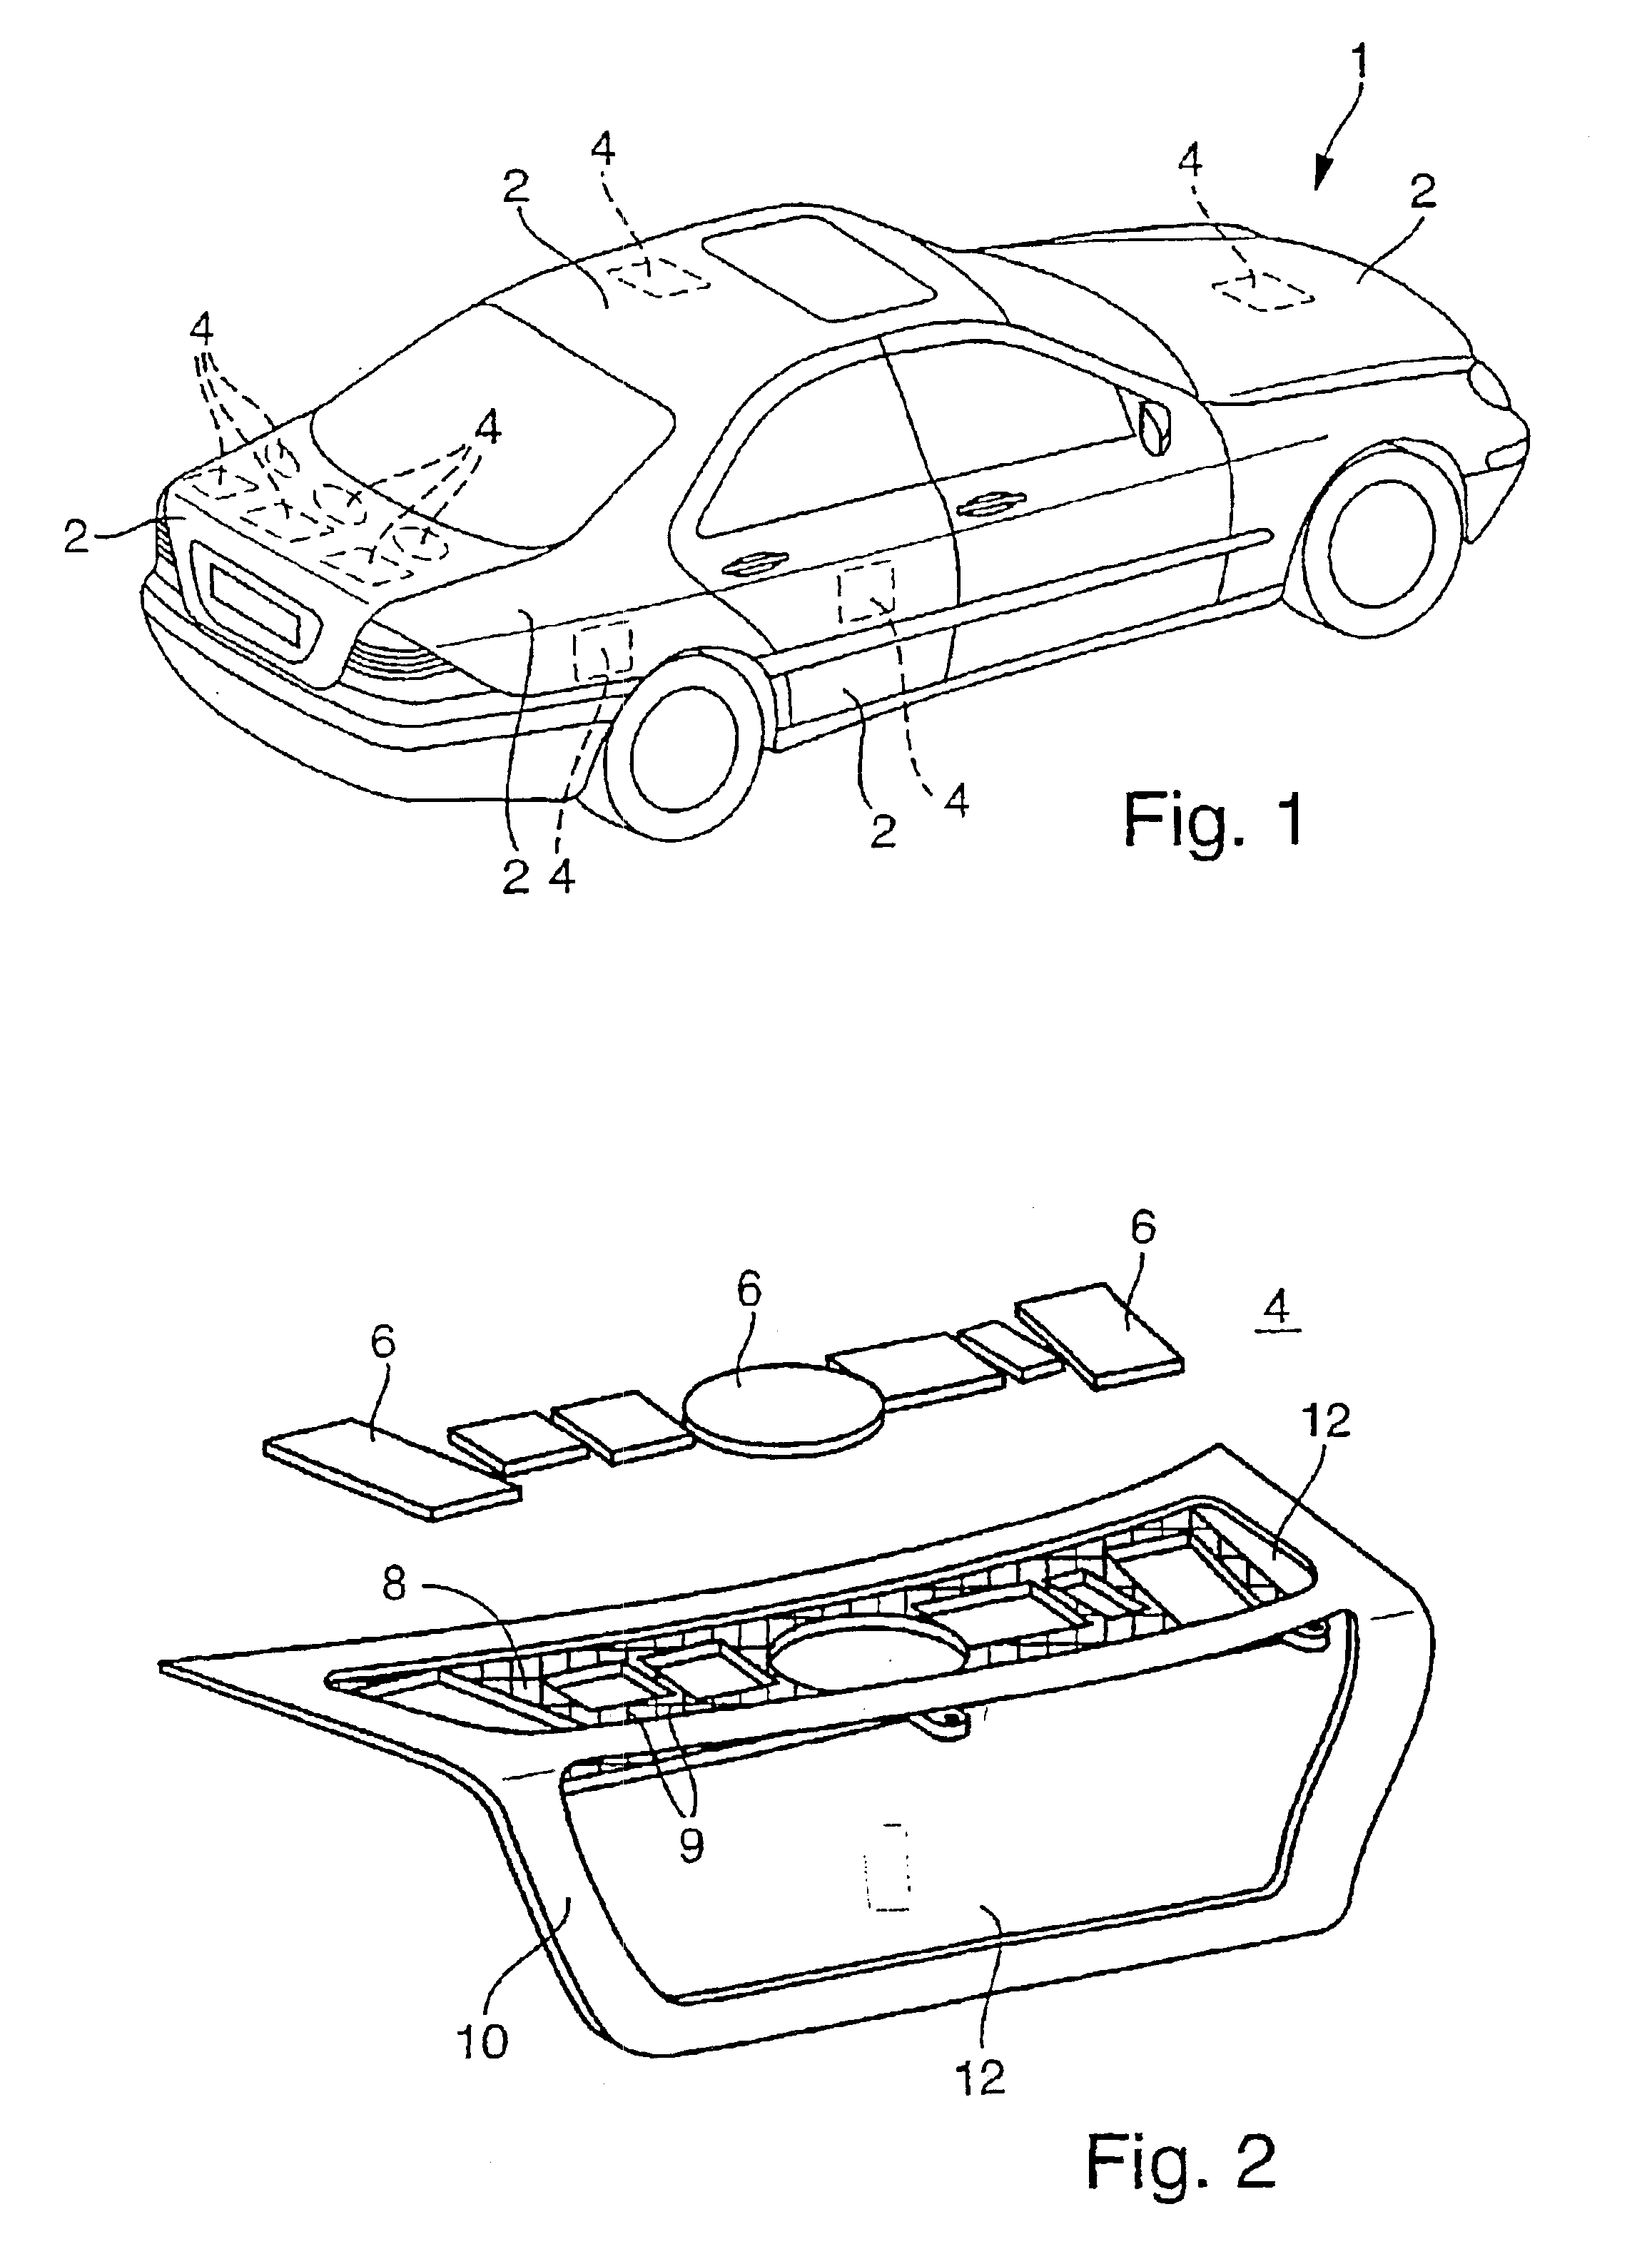 Bodywork part with integrated antenna